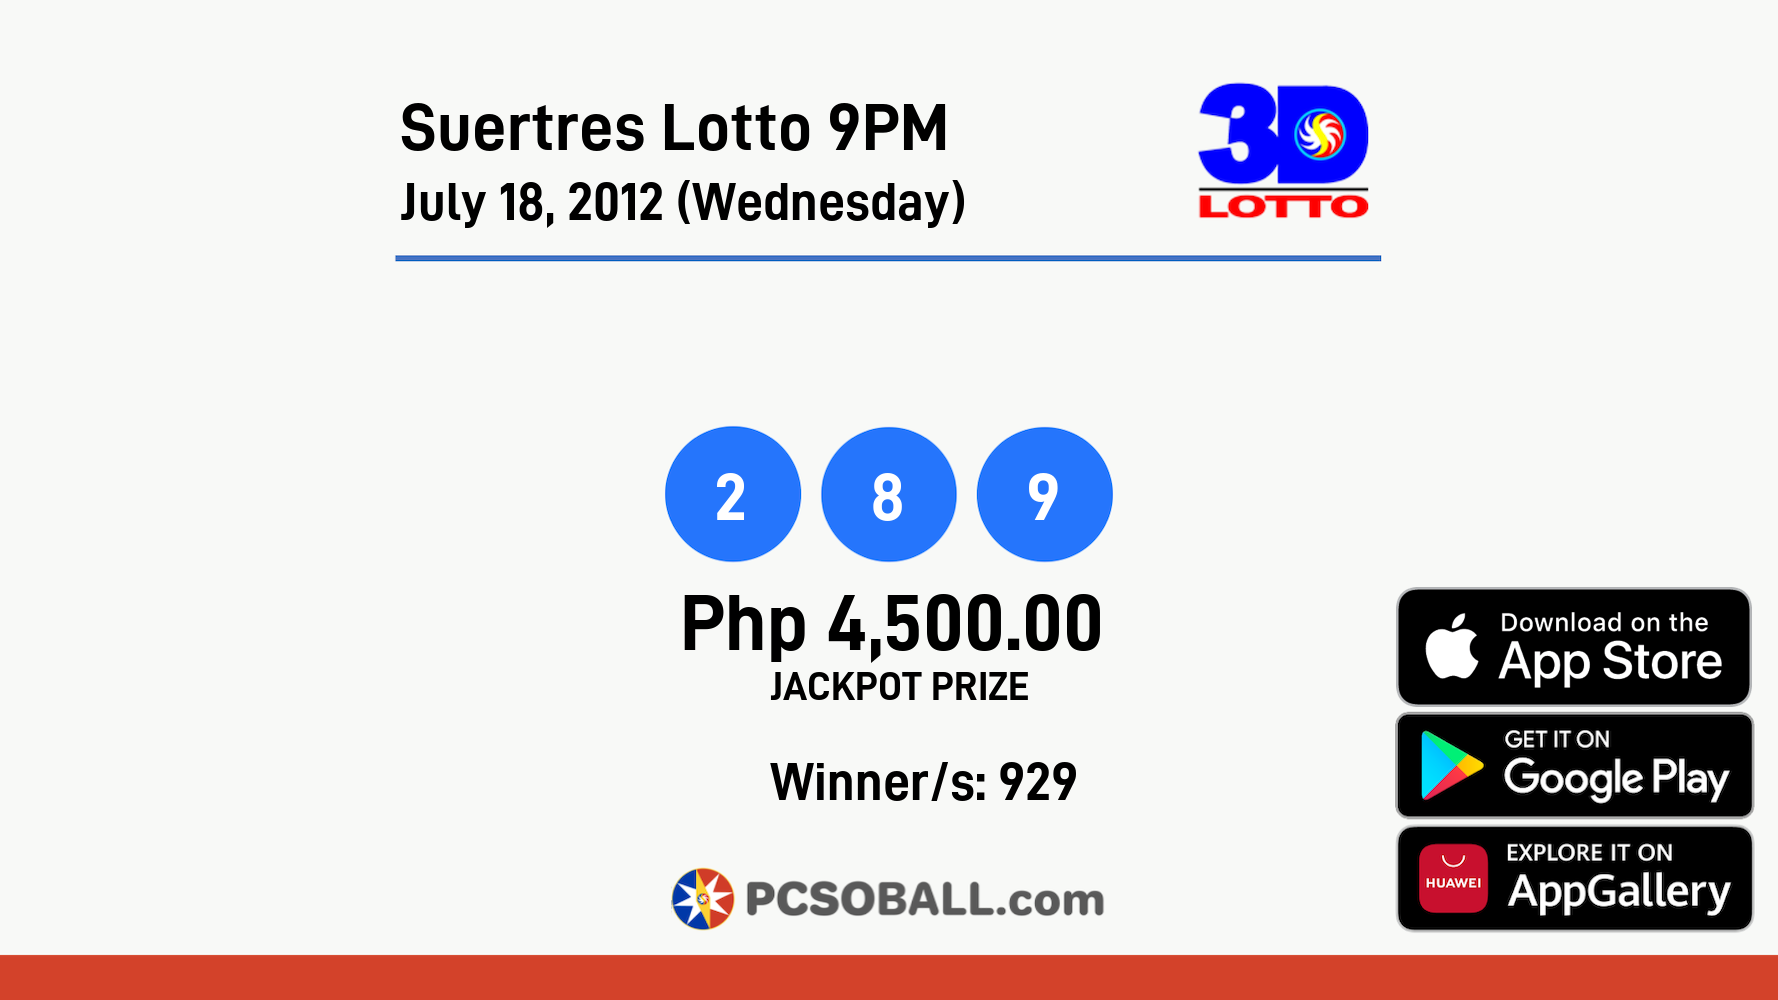 Suertres Lotto 9PM July 18, 2012 (Wednesday) Result